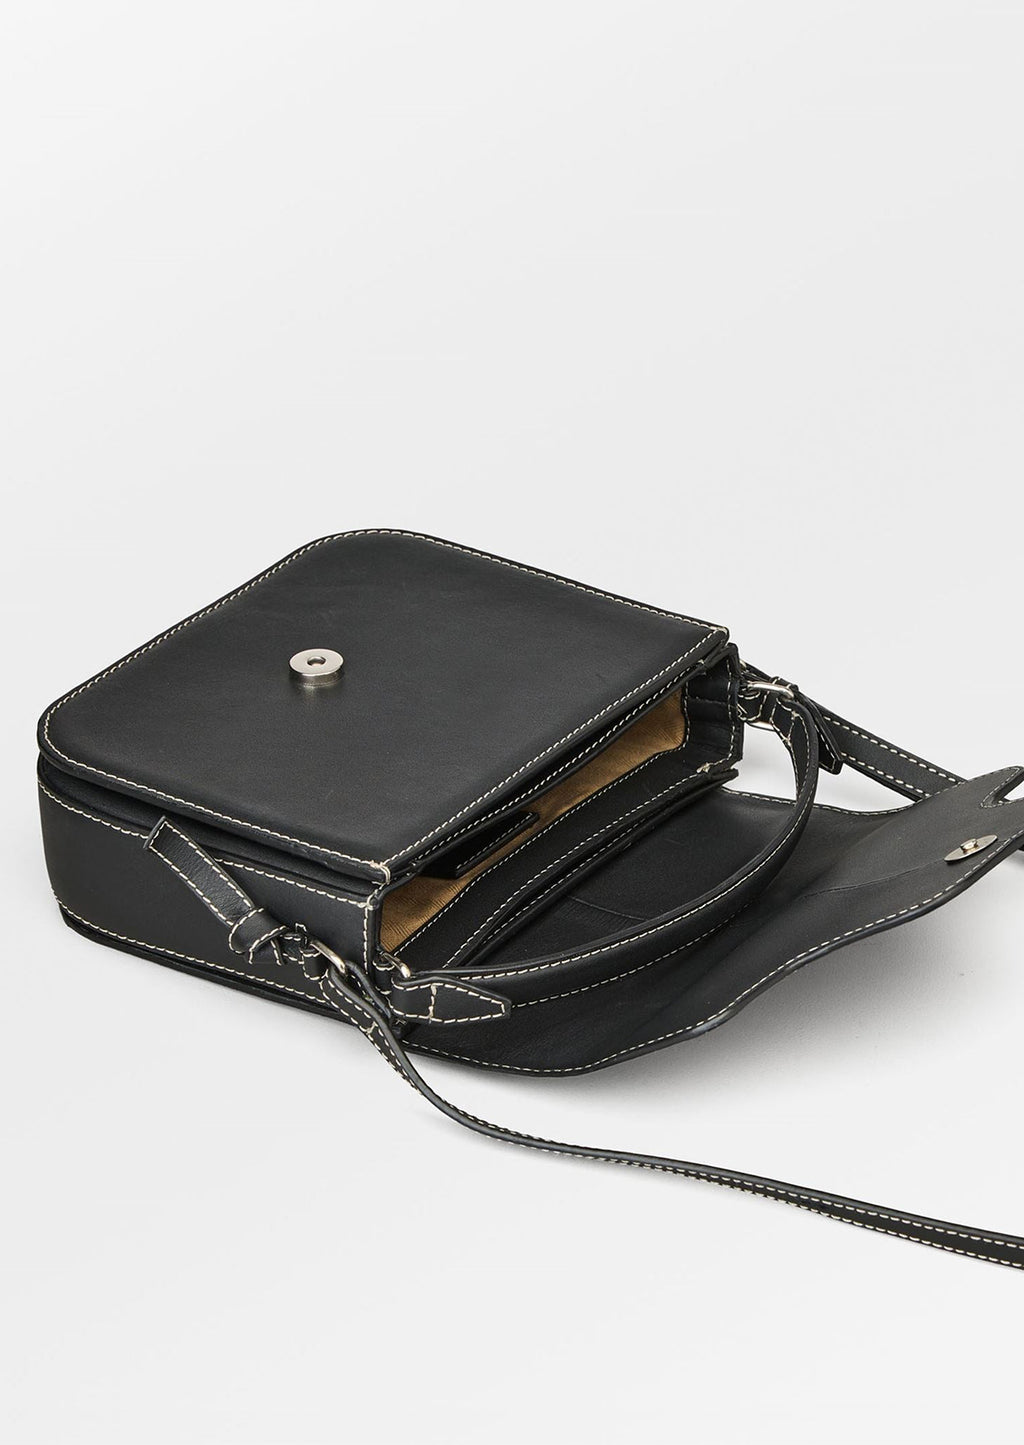 4: A leather handbag in black with white contrast stitching and flap front design.